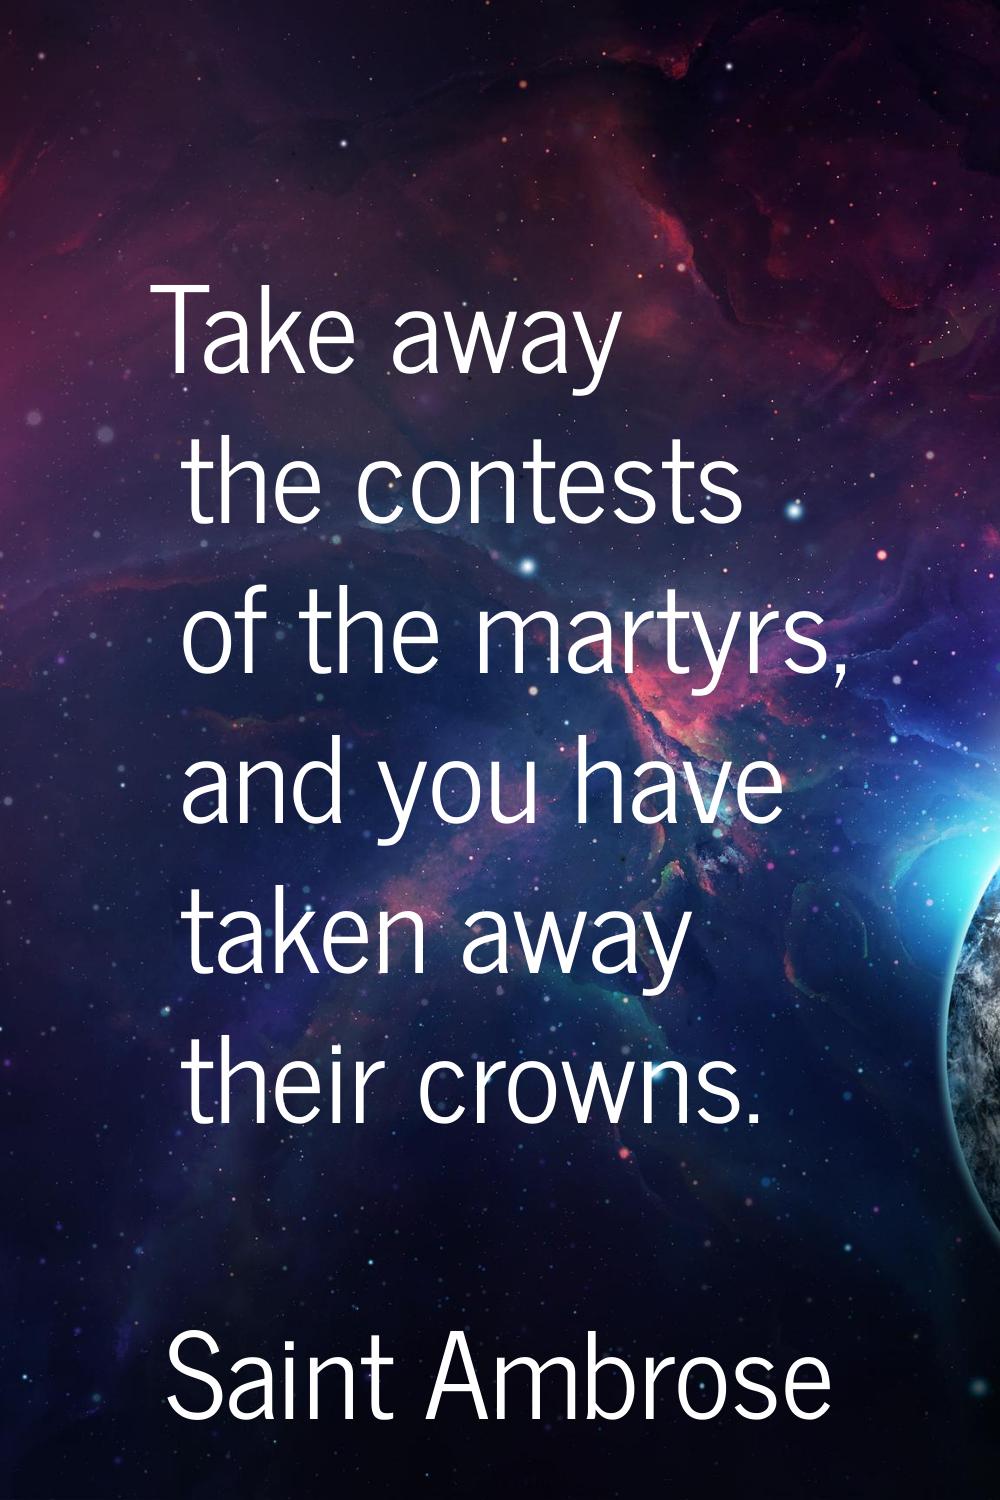 Take away the contests of the martyrs, and you have taken away their crowns.